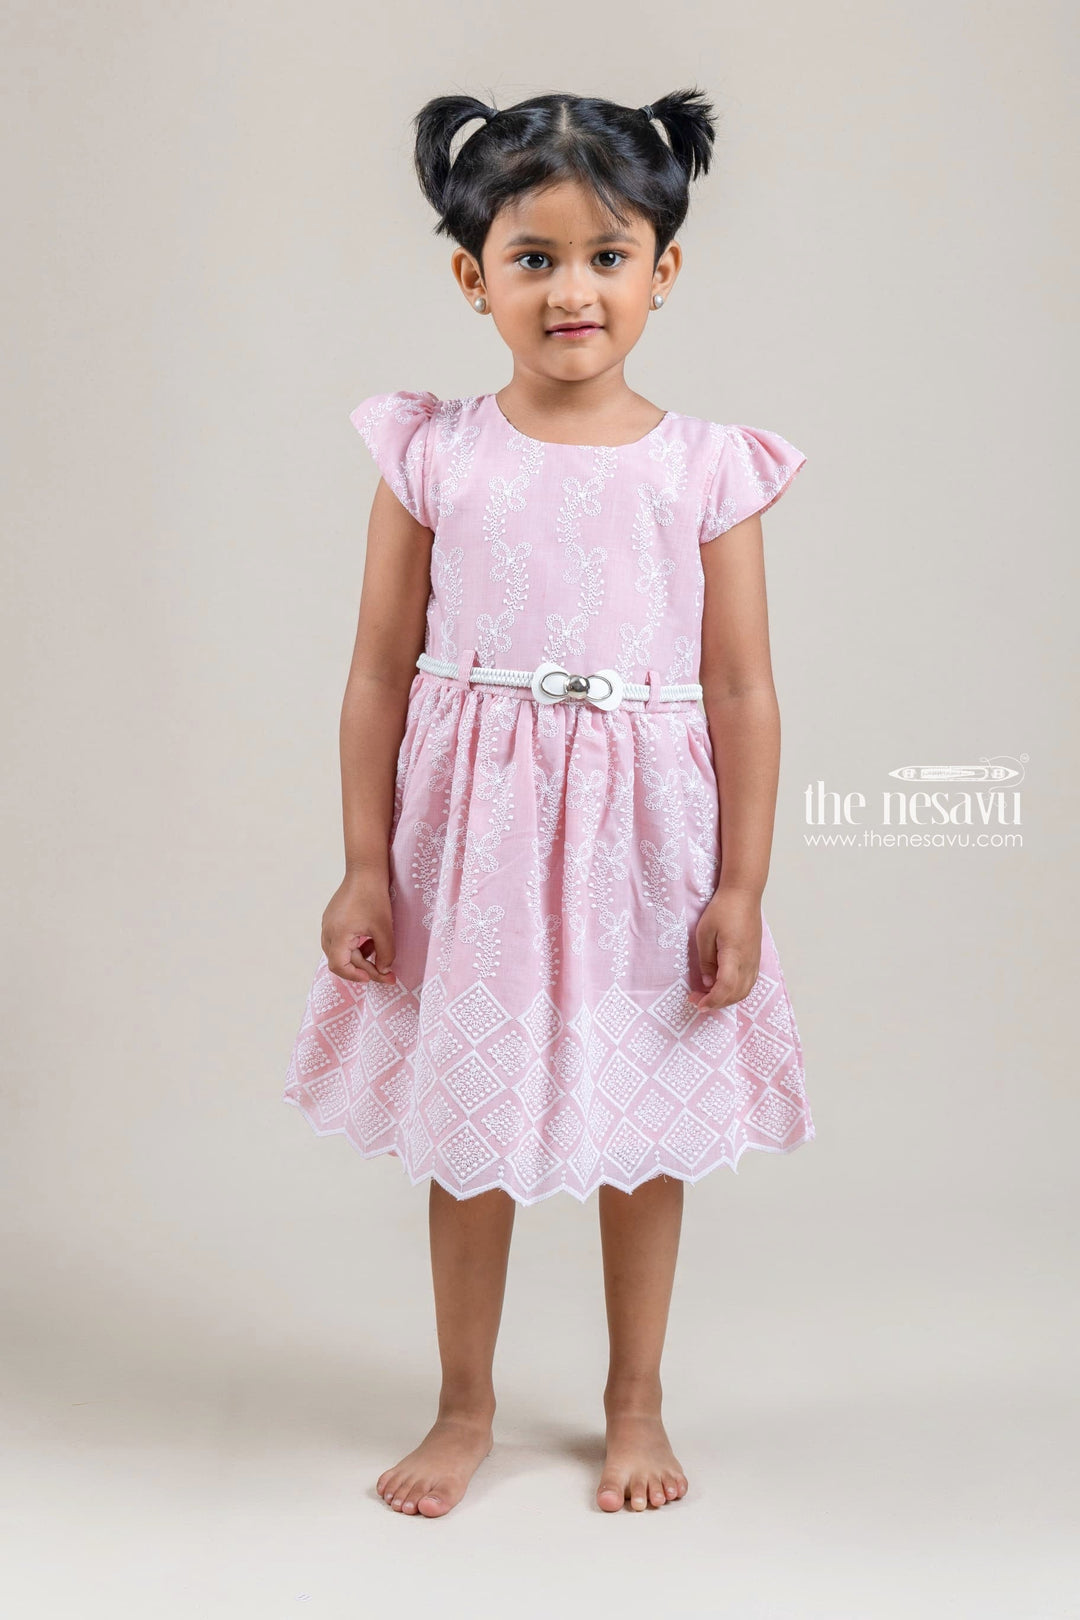 The Nesavu Baby Cotton Frocks Pretty Pink Floral Embroidered Baby Cotton Frock With Designer Belt Nesavu 14 (6M) / Pink / Cotton Blend BFJ398A-14 Latest Frock Gown For Baby Girls | Pink Frock Collection | The Nesavu